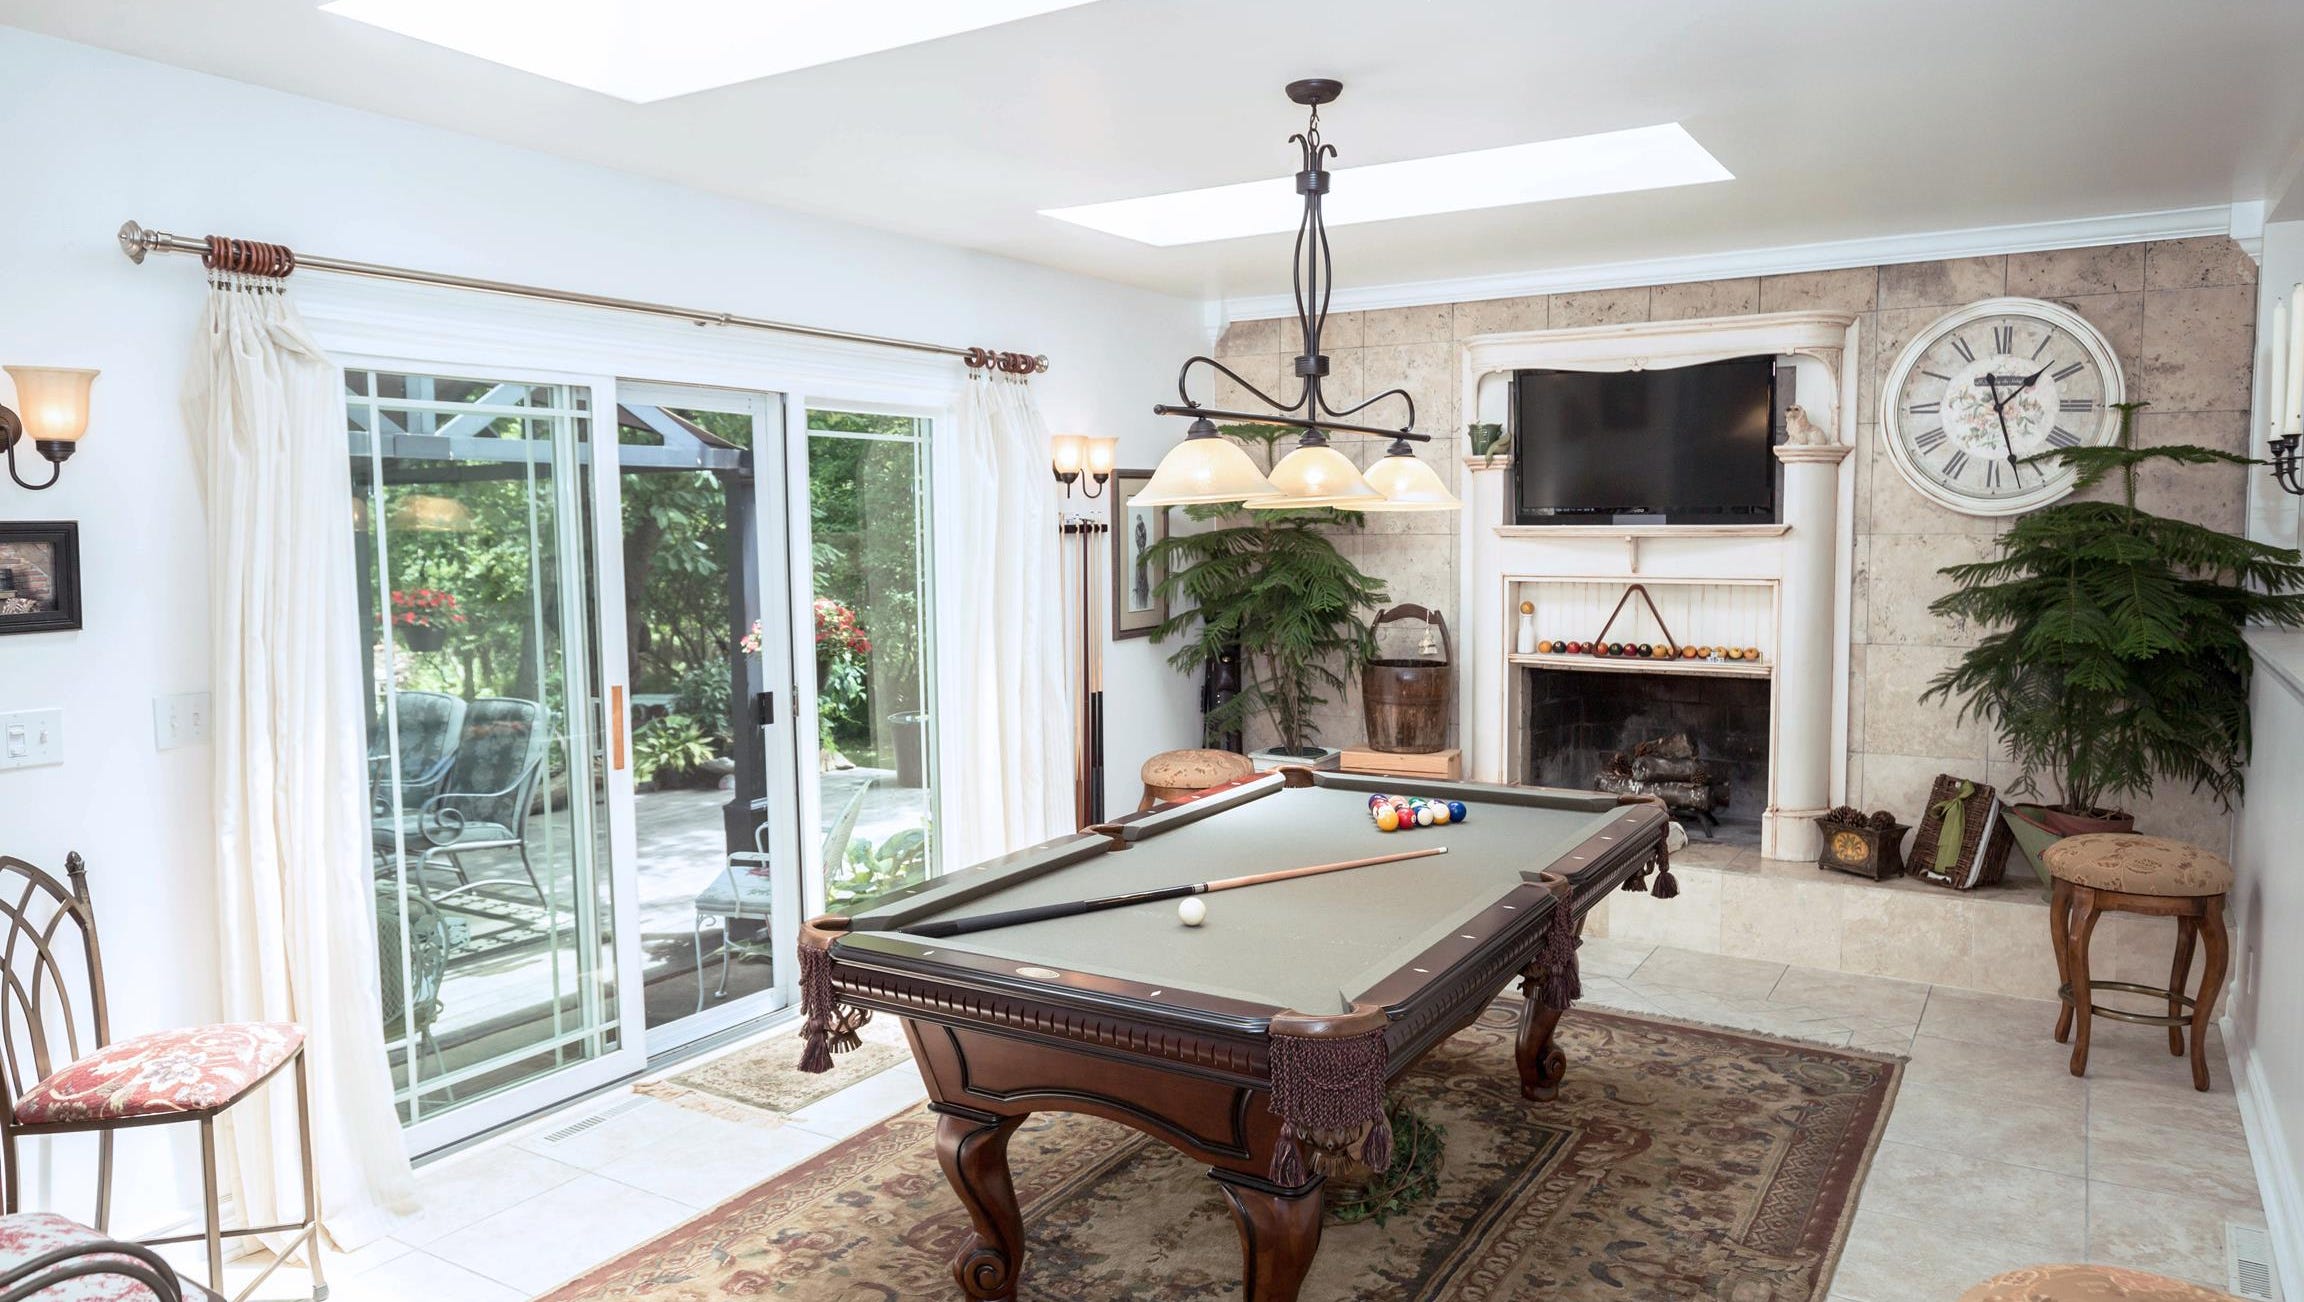 Once the childhood home of Madonna, this five-bedroom, 2,700-square-foot Rochester Hills colonial is on the market after a remodeling this year.  It is listed for sale at $479,000.